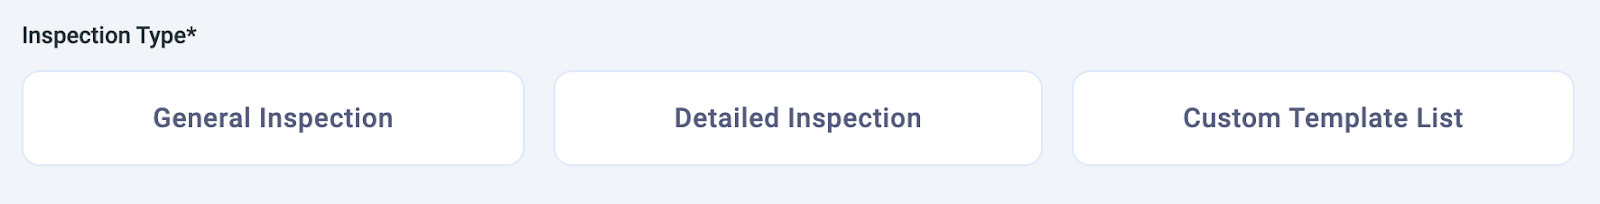 Inspection types - digital vehicle inspection software